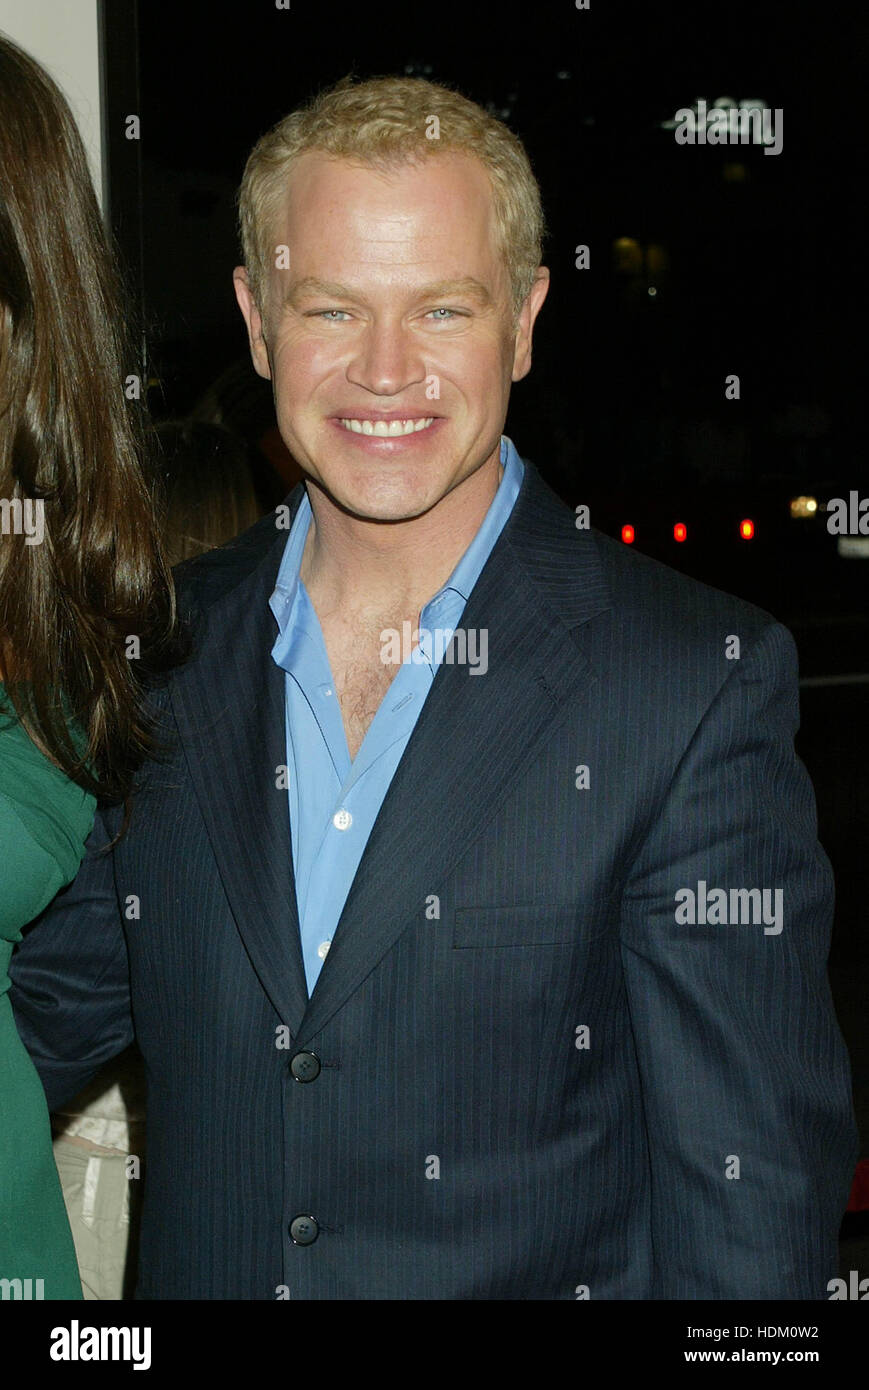 Neal McDonough and wife Ruve Robertson at the premiere of  'Walking Tall'  in Hollywood, California on Monday March 29,  2004.  Photo credit: Francis Specker Stock Photo